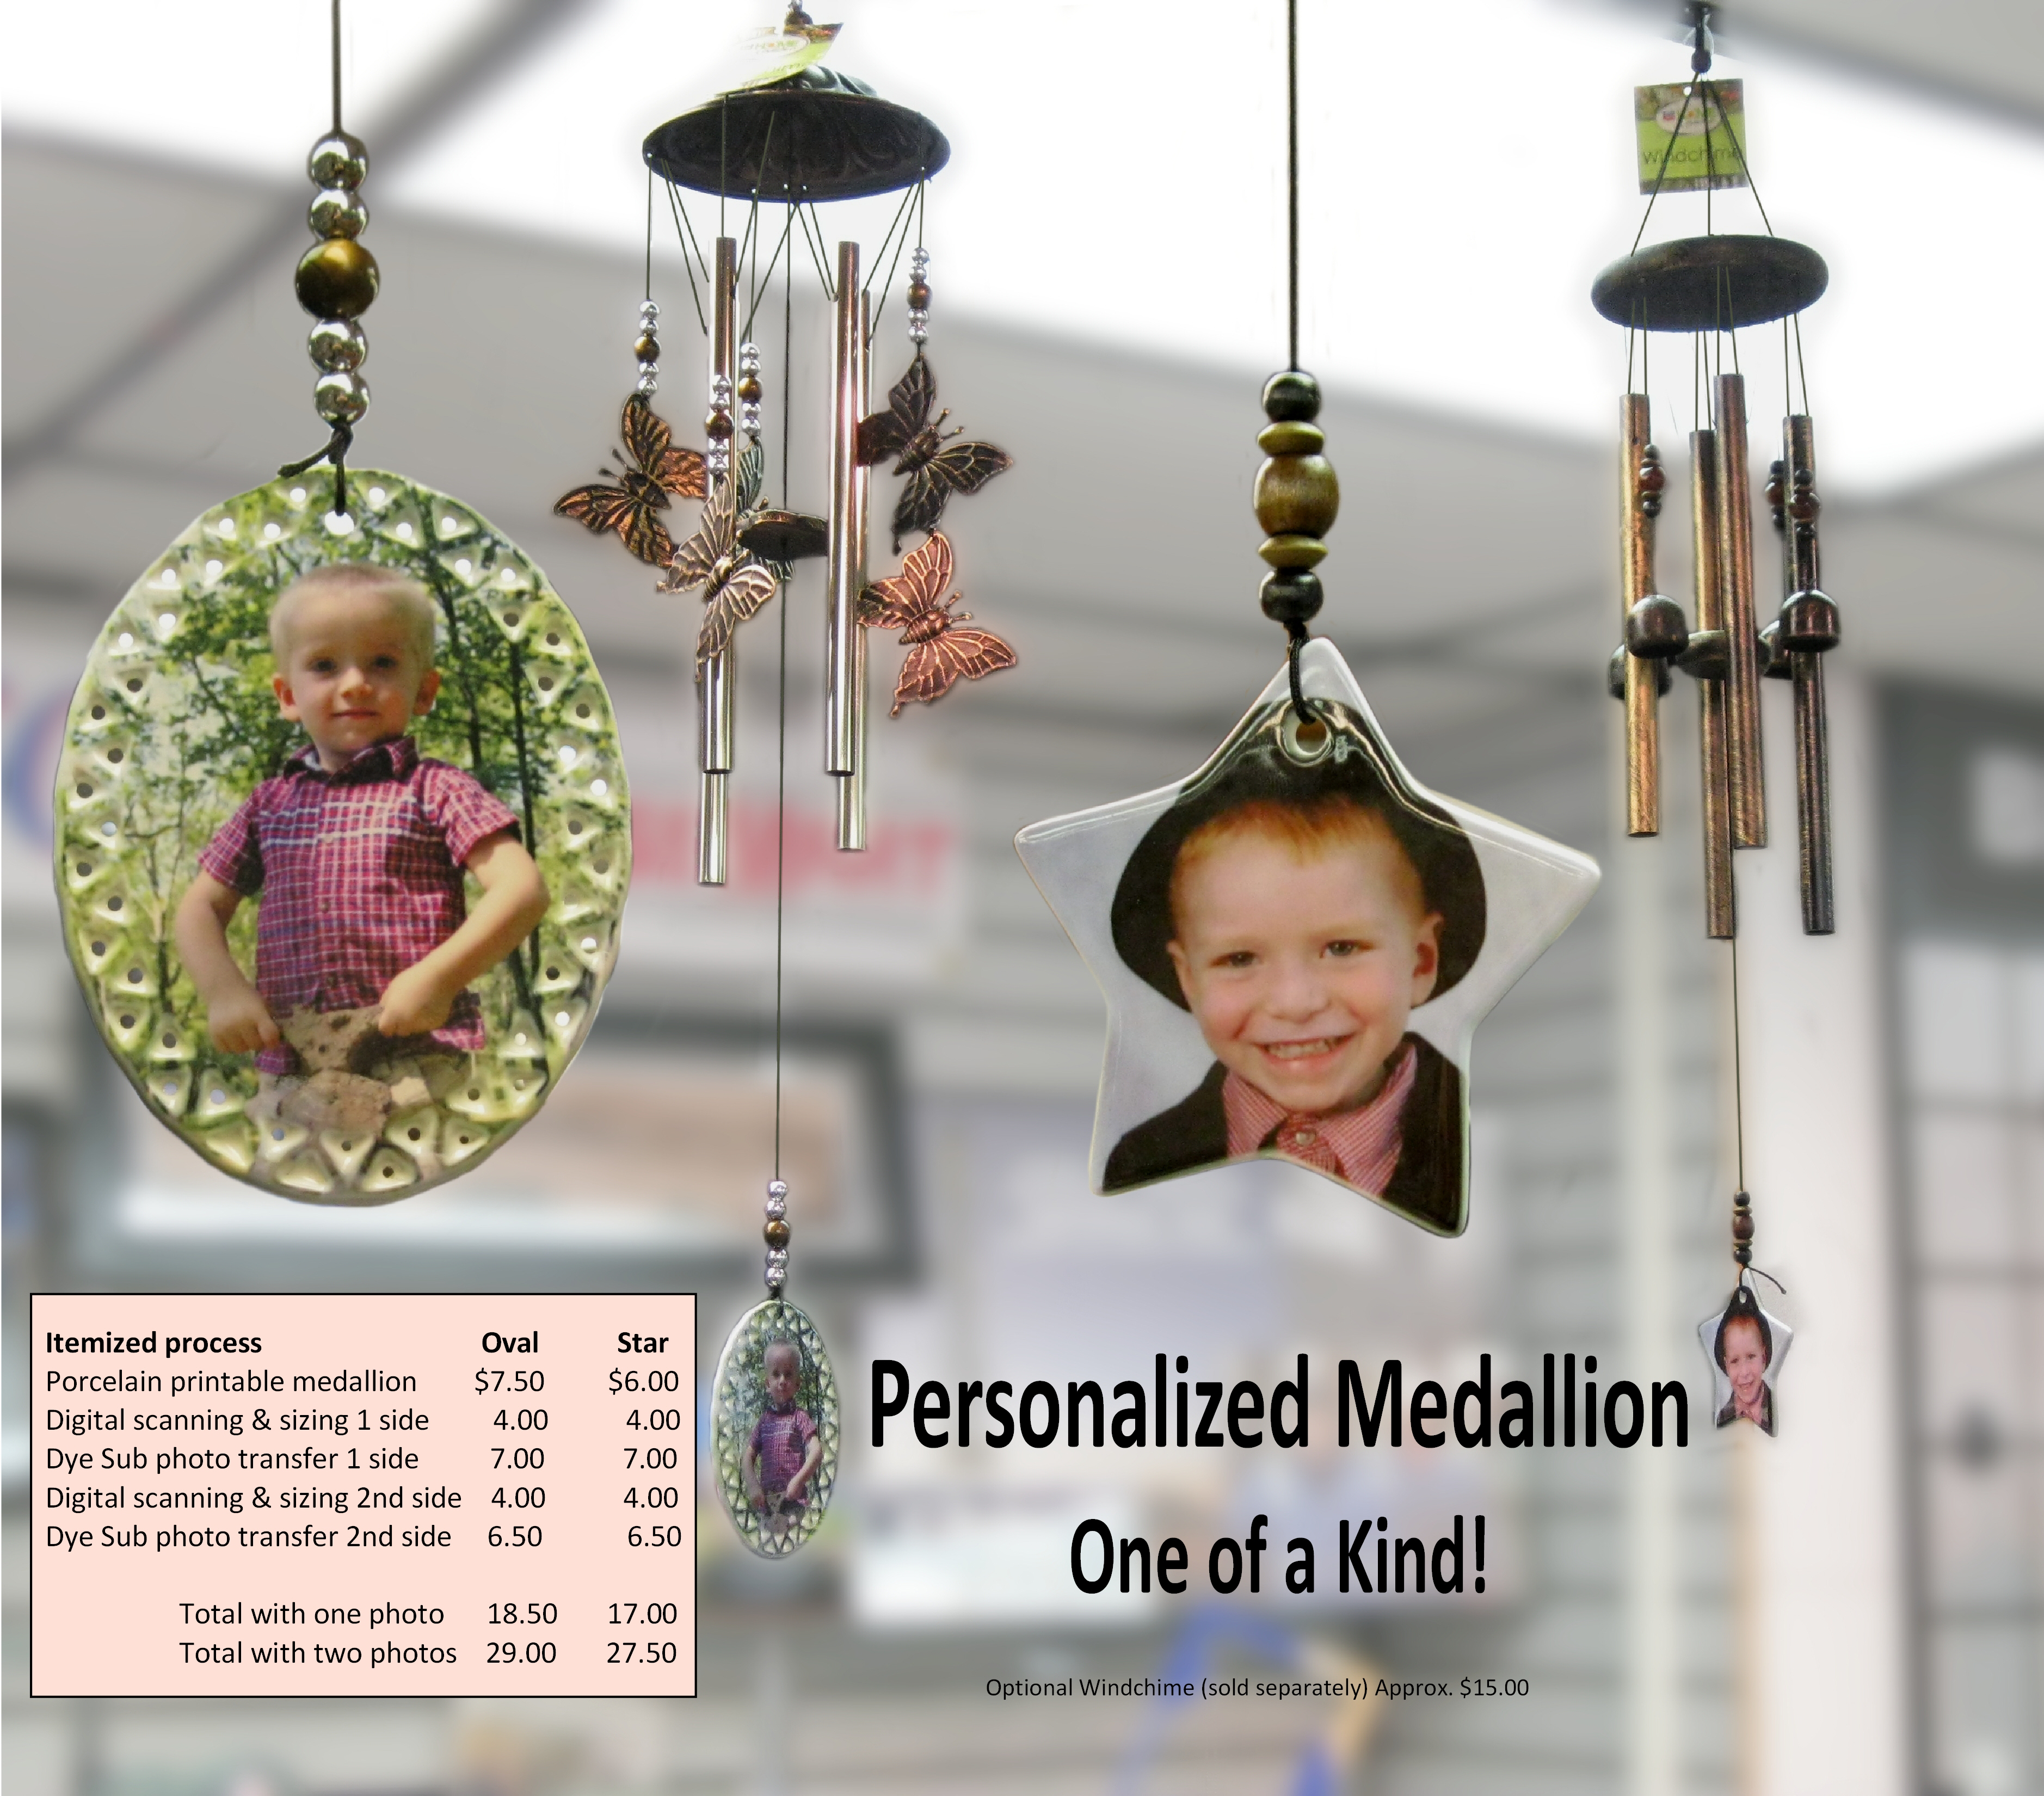 Adding Value w/ a Windchime made with sublimation printing